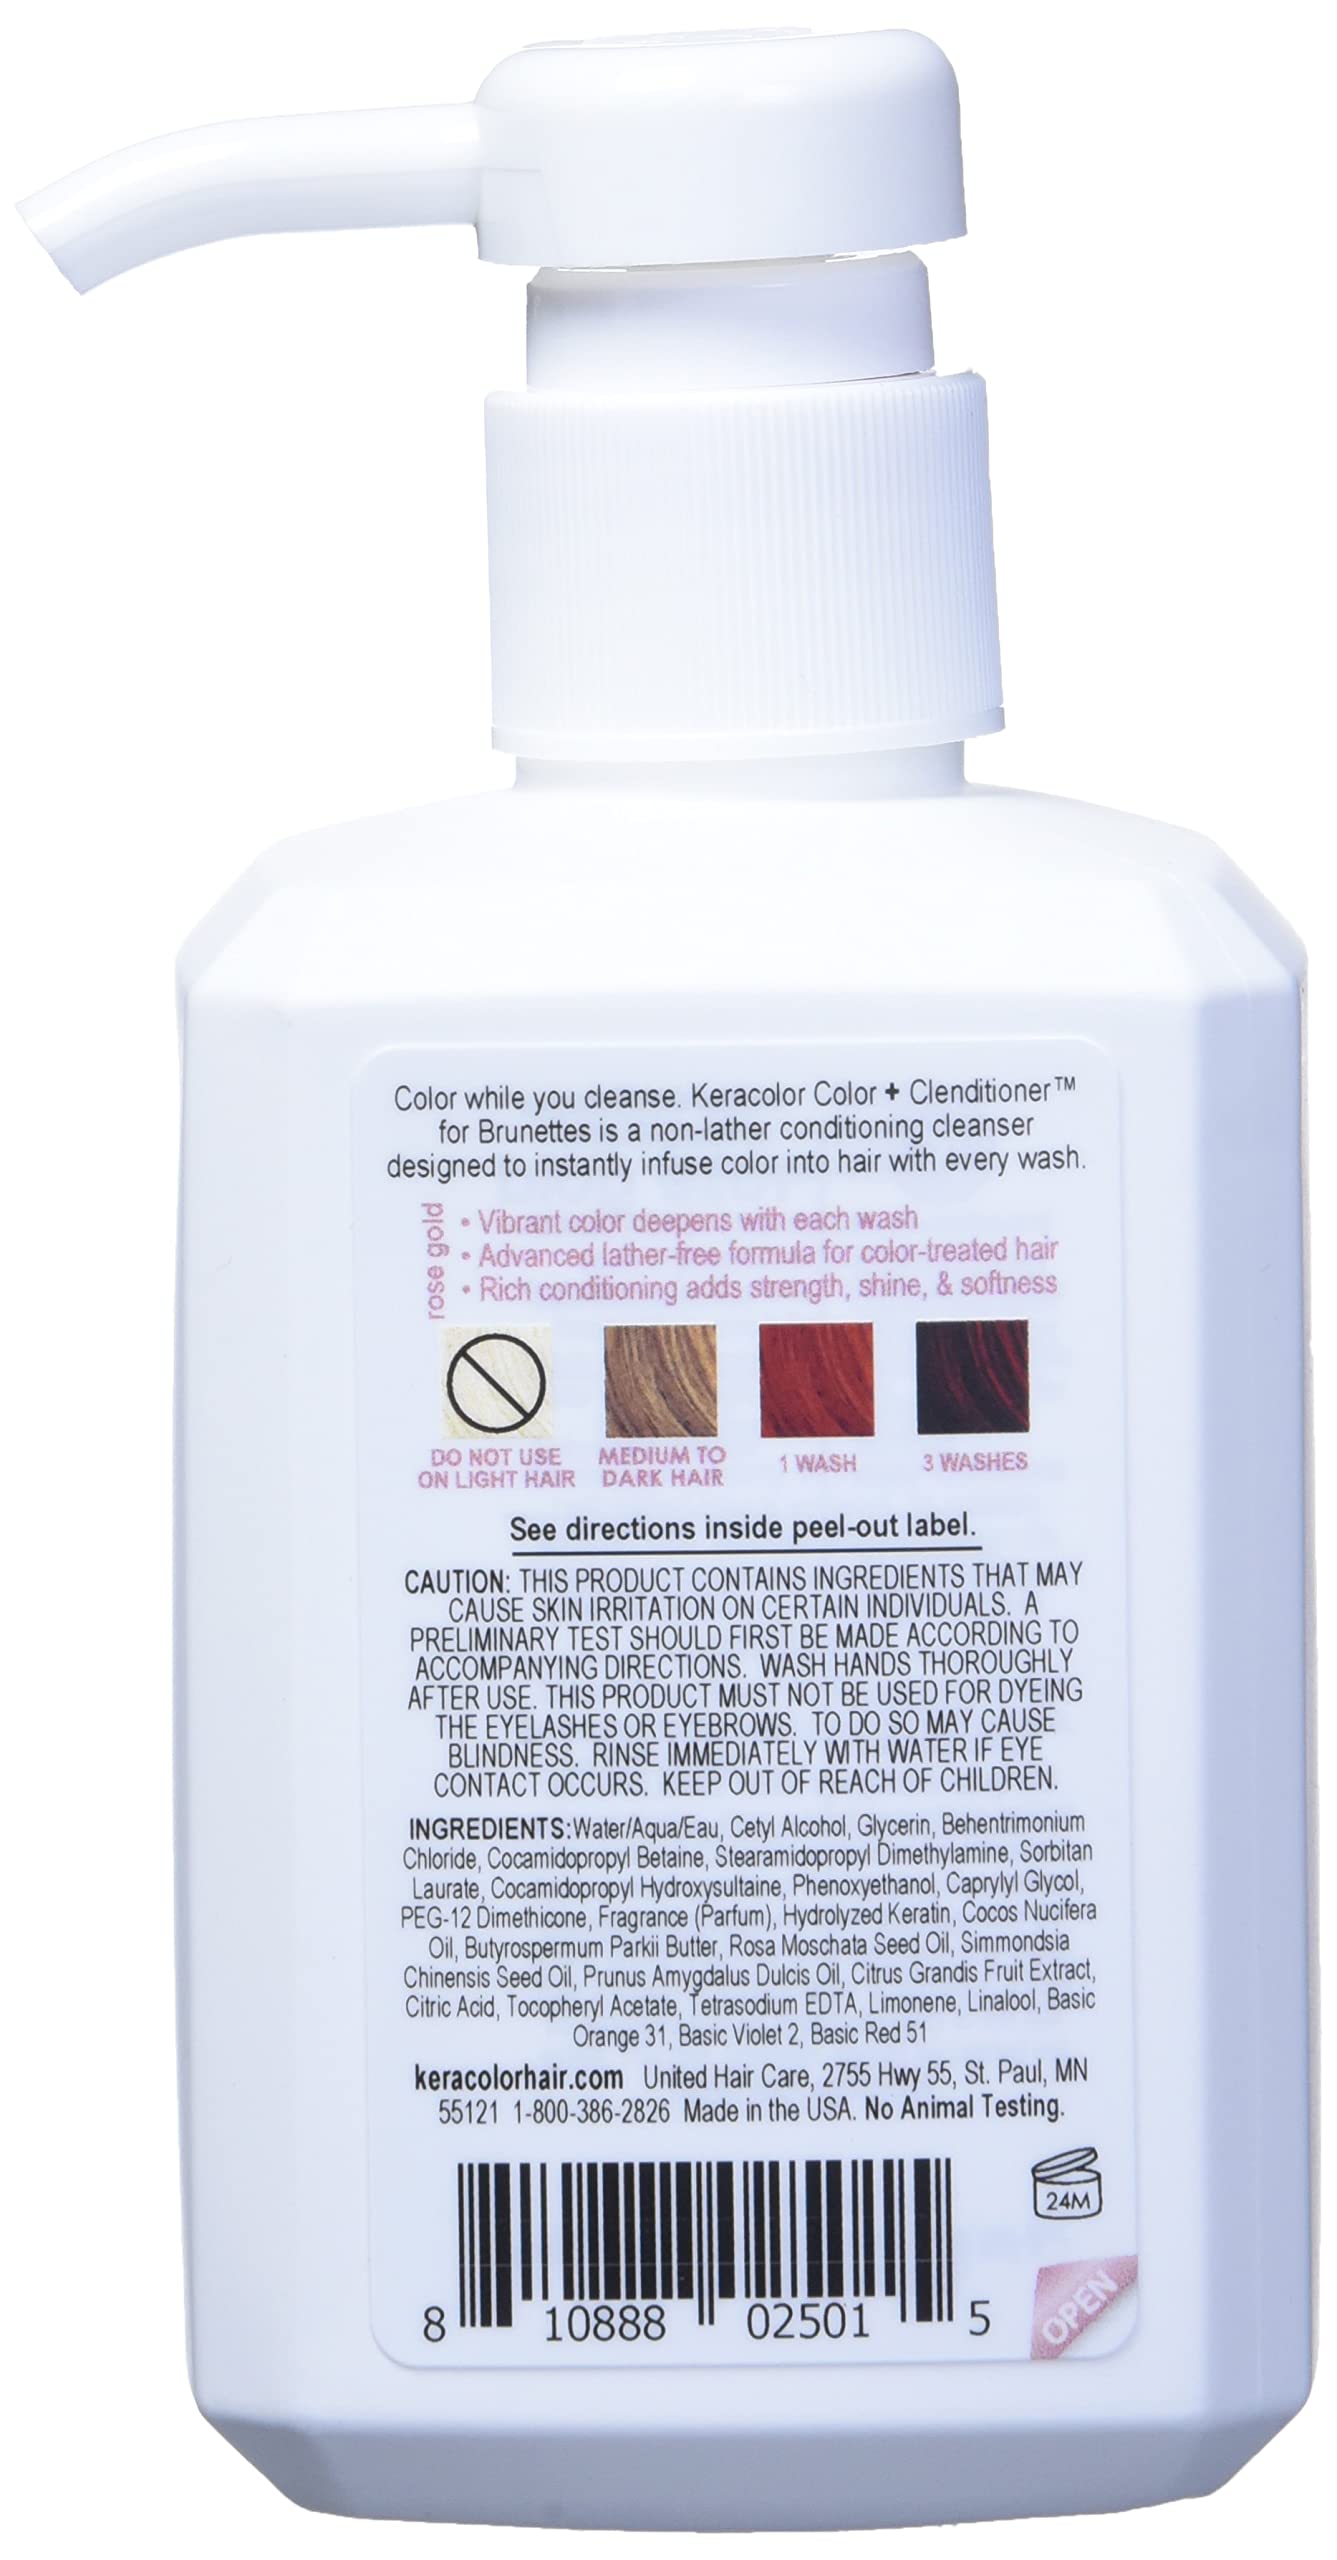 Keracolor Clenditioner for Brunettes ROSE GOLD Hair Dye - Semi Permanent Hair Color Depositing Conditioner, Cruelty-free, 12 Fl. Oz.